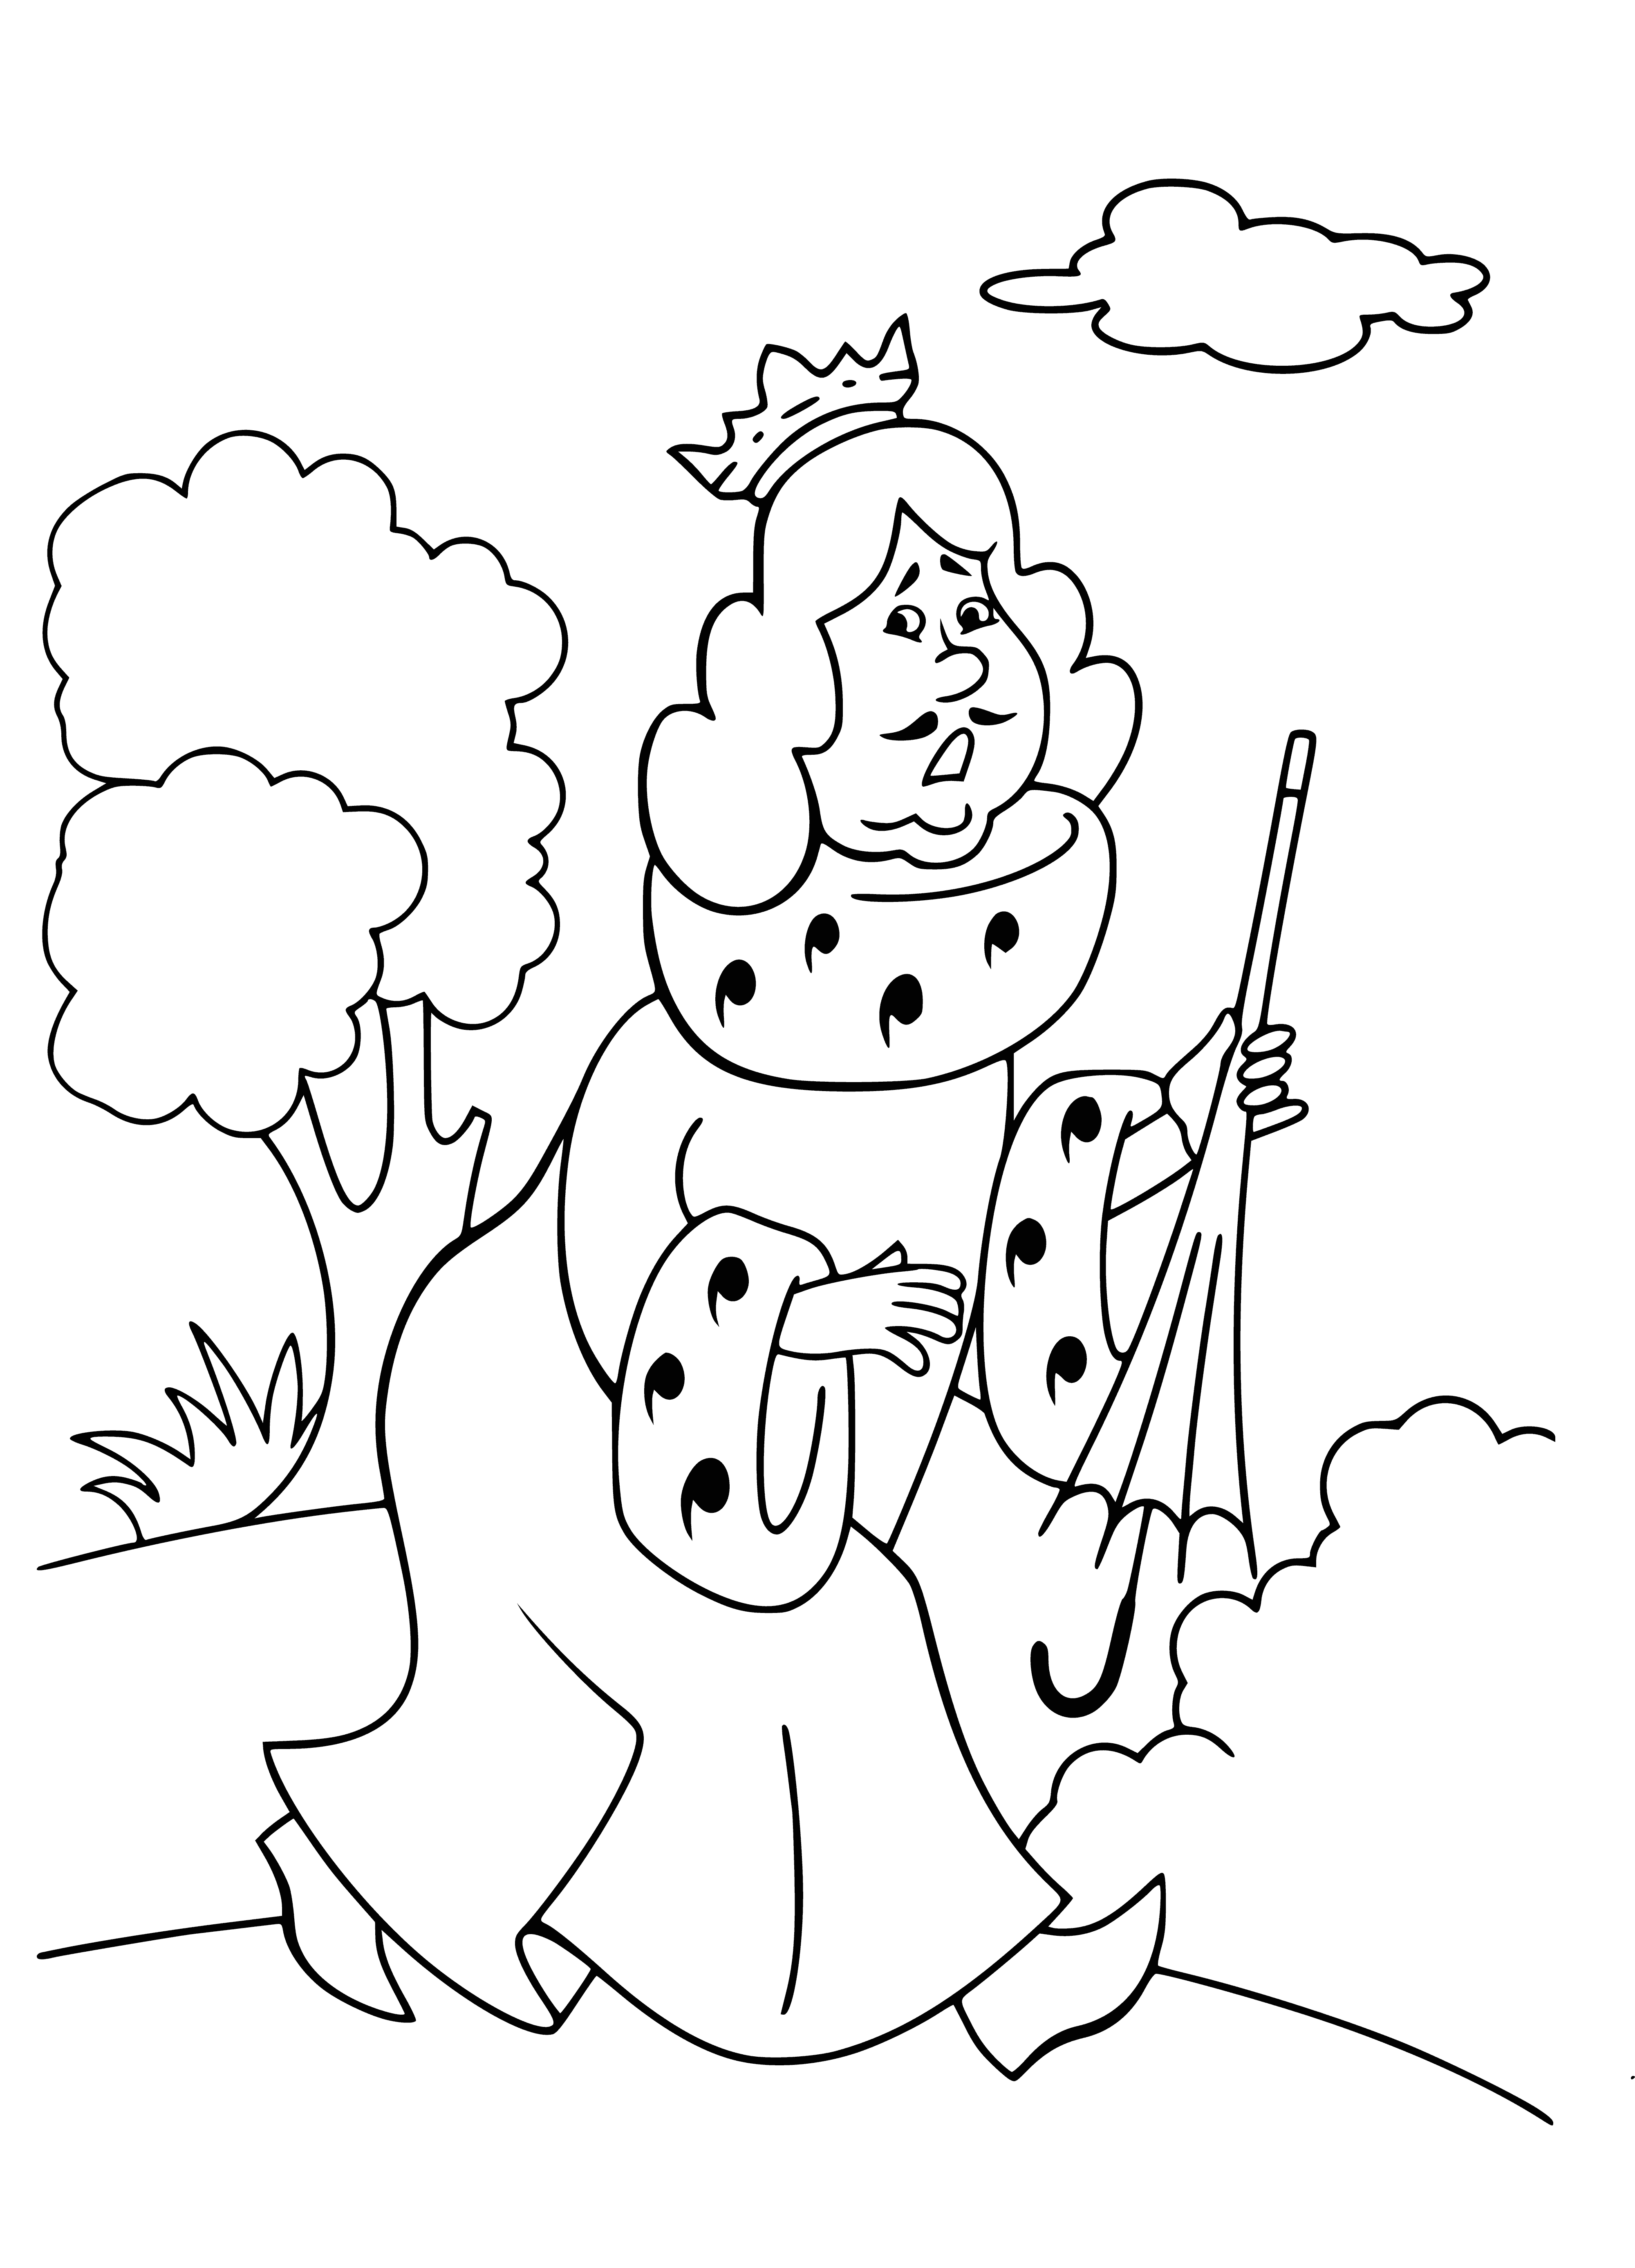 coloring page: King with too-big crown sits on throne playing with drum while musicians: donkey, dog, cat, rooster play instruments, looking happy.